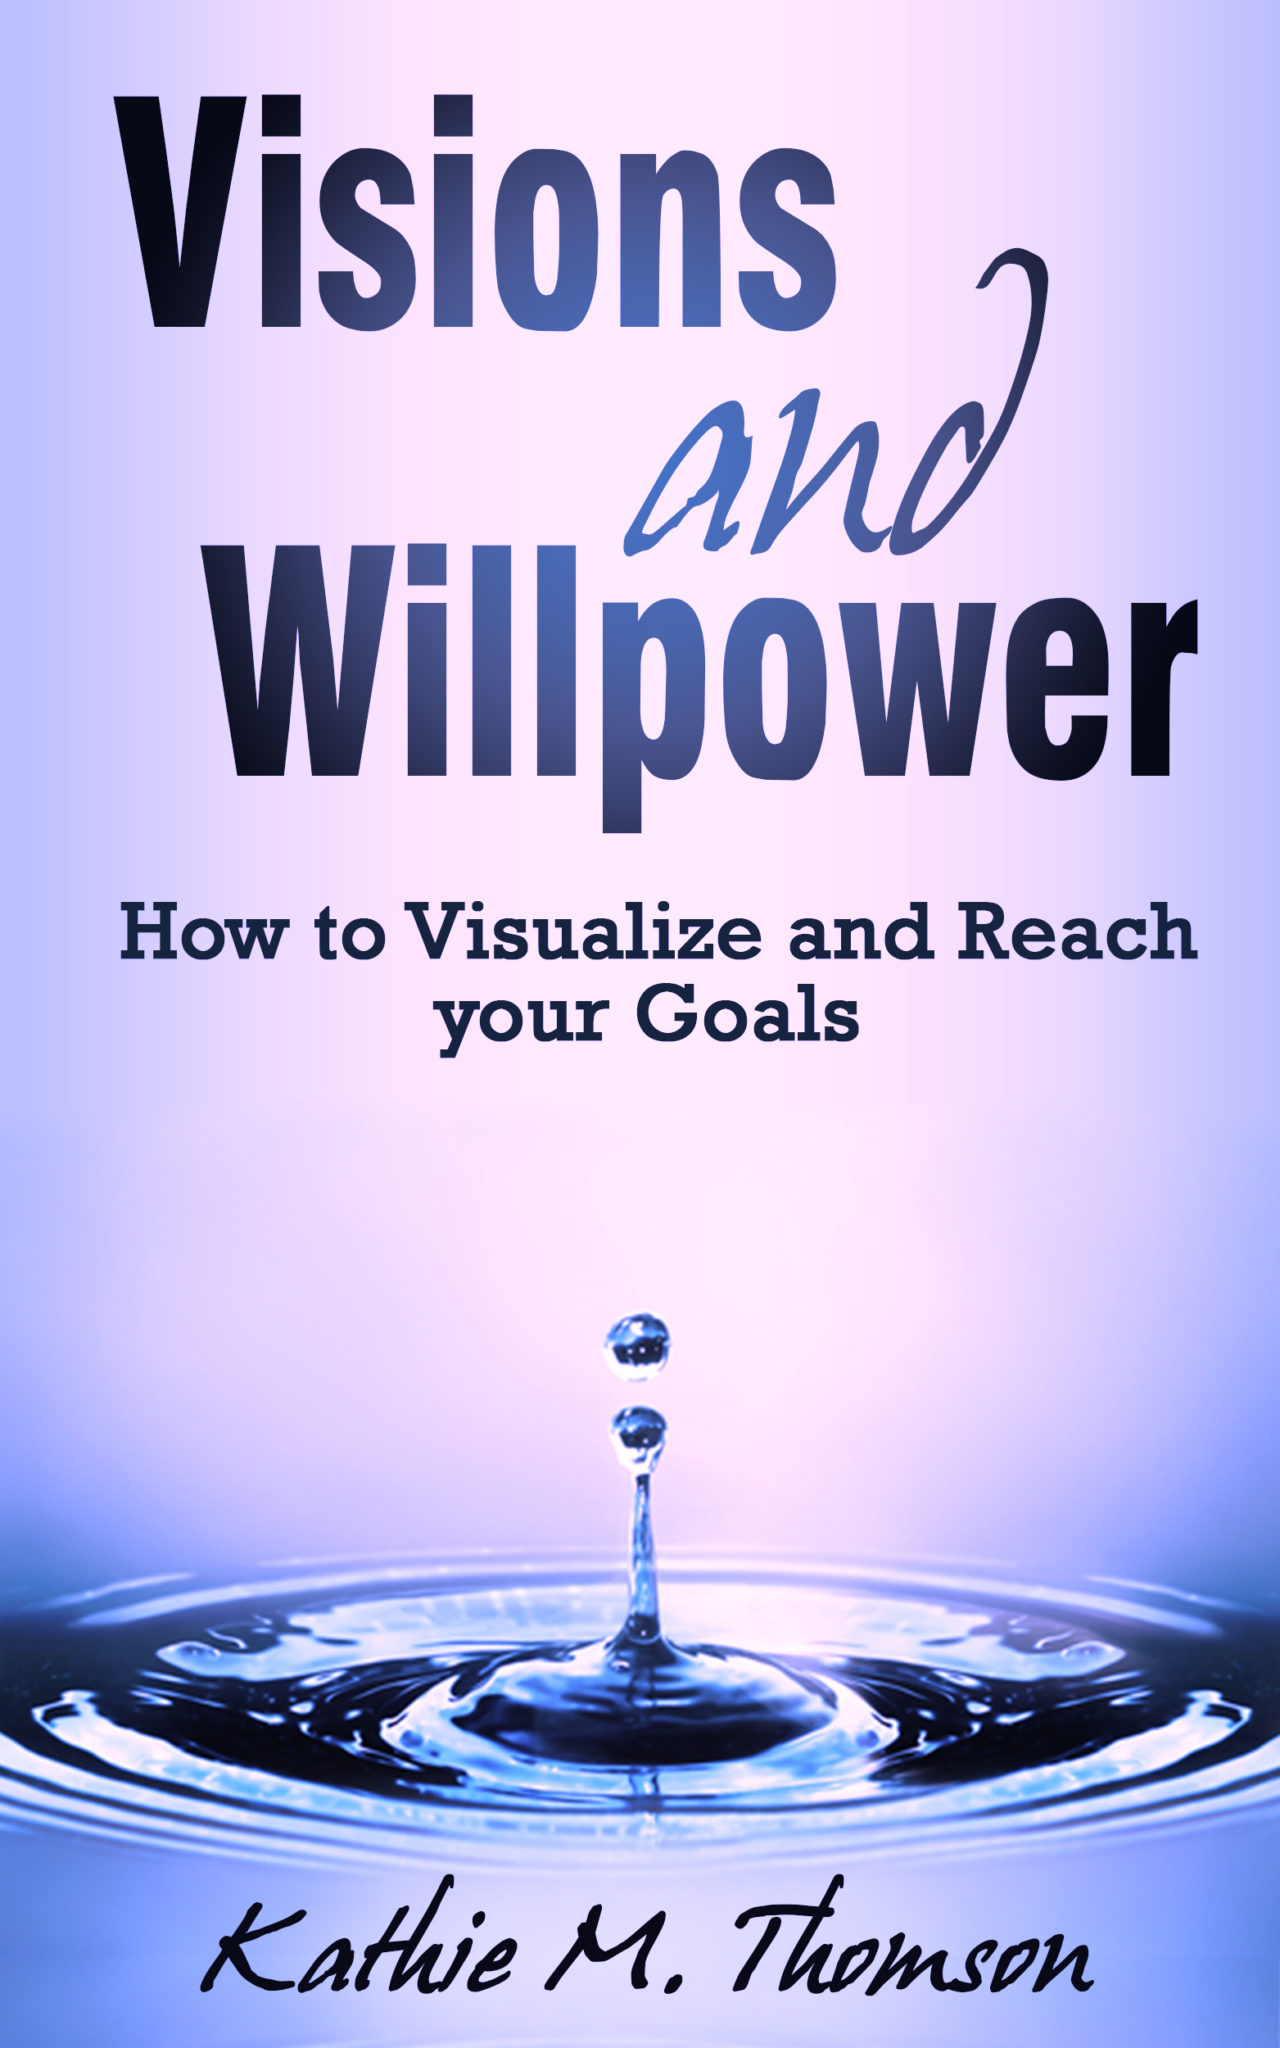 Visions and Willpower: How to Visualize and Reach Your Goals by Kathie M. Thomson